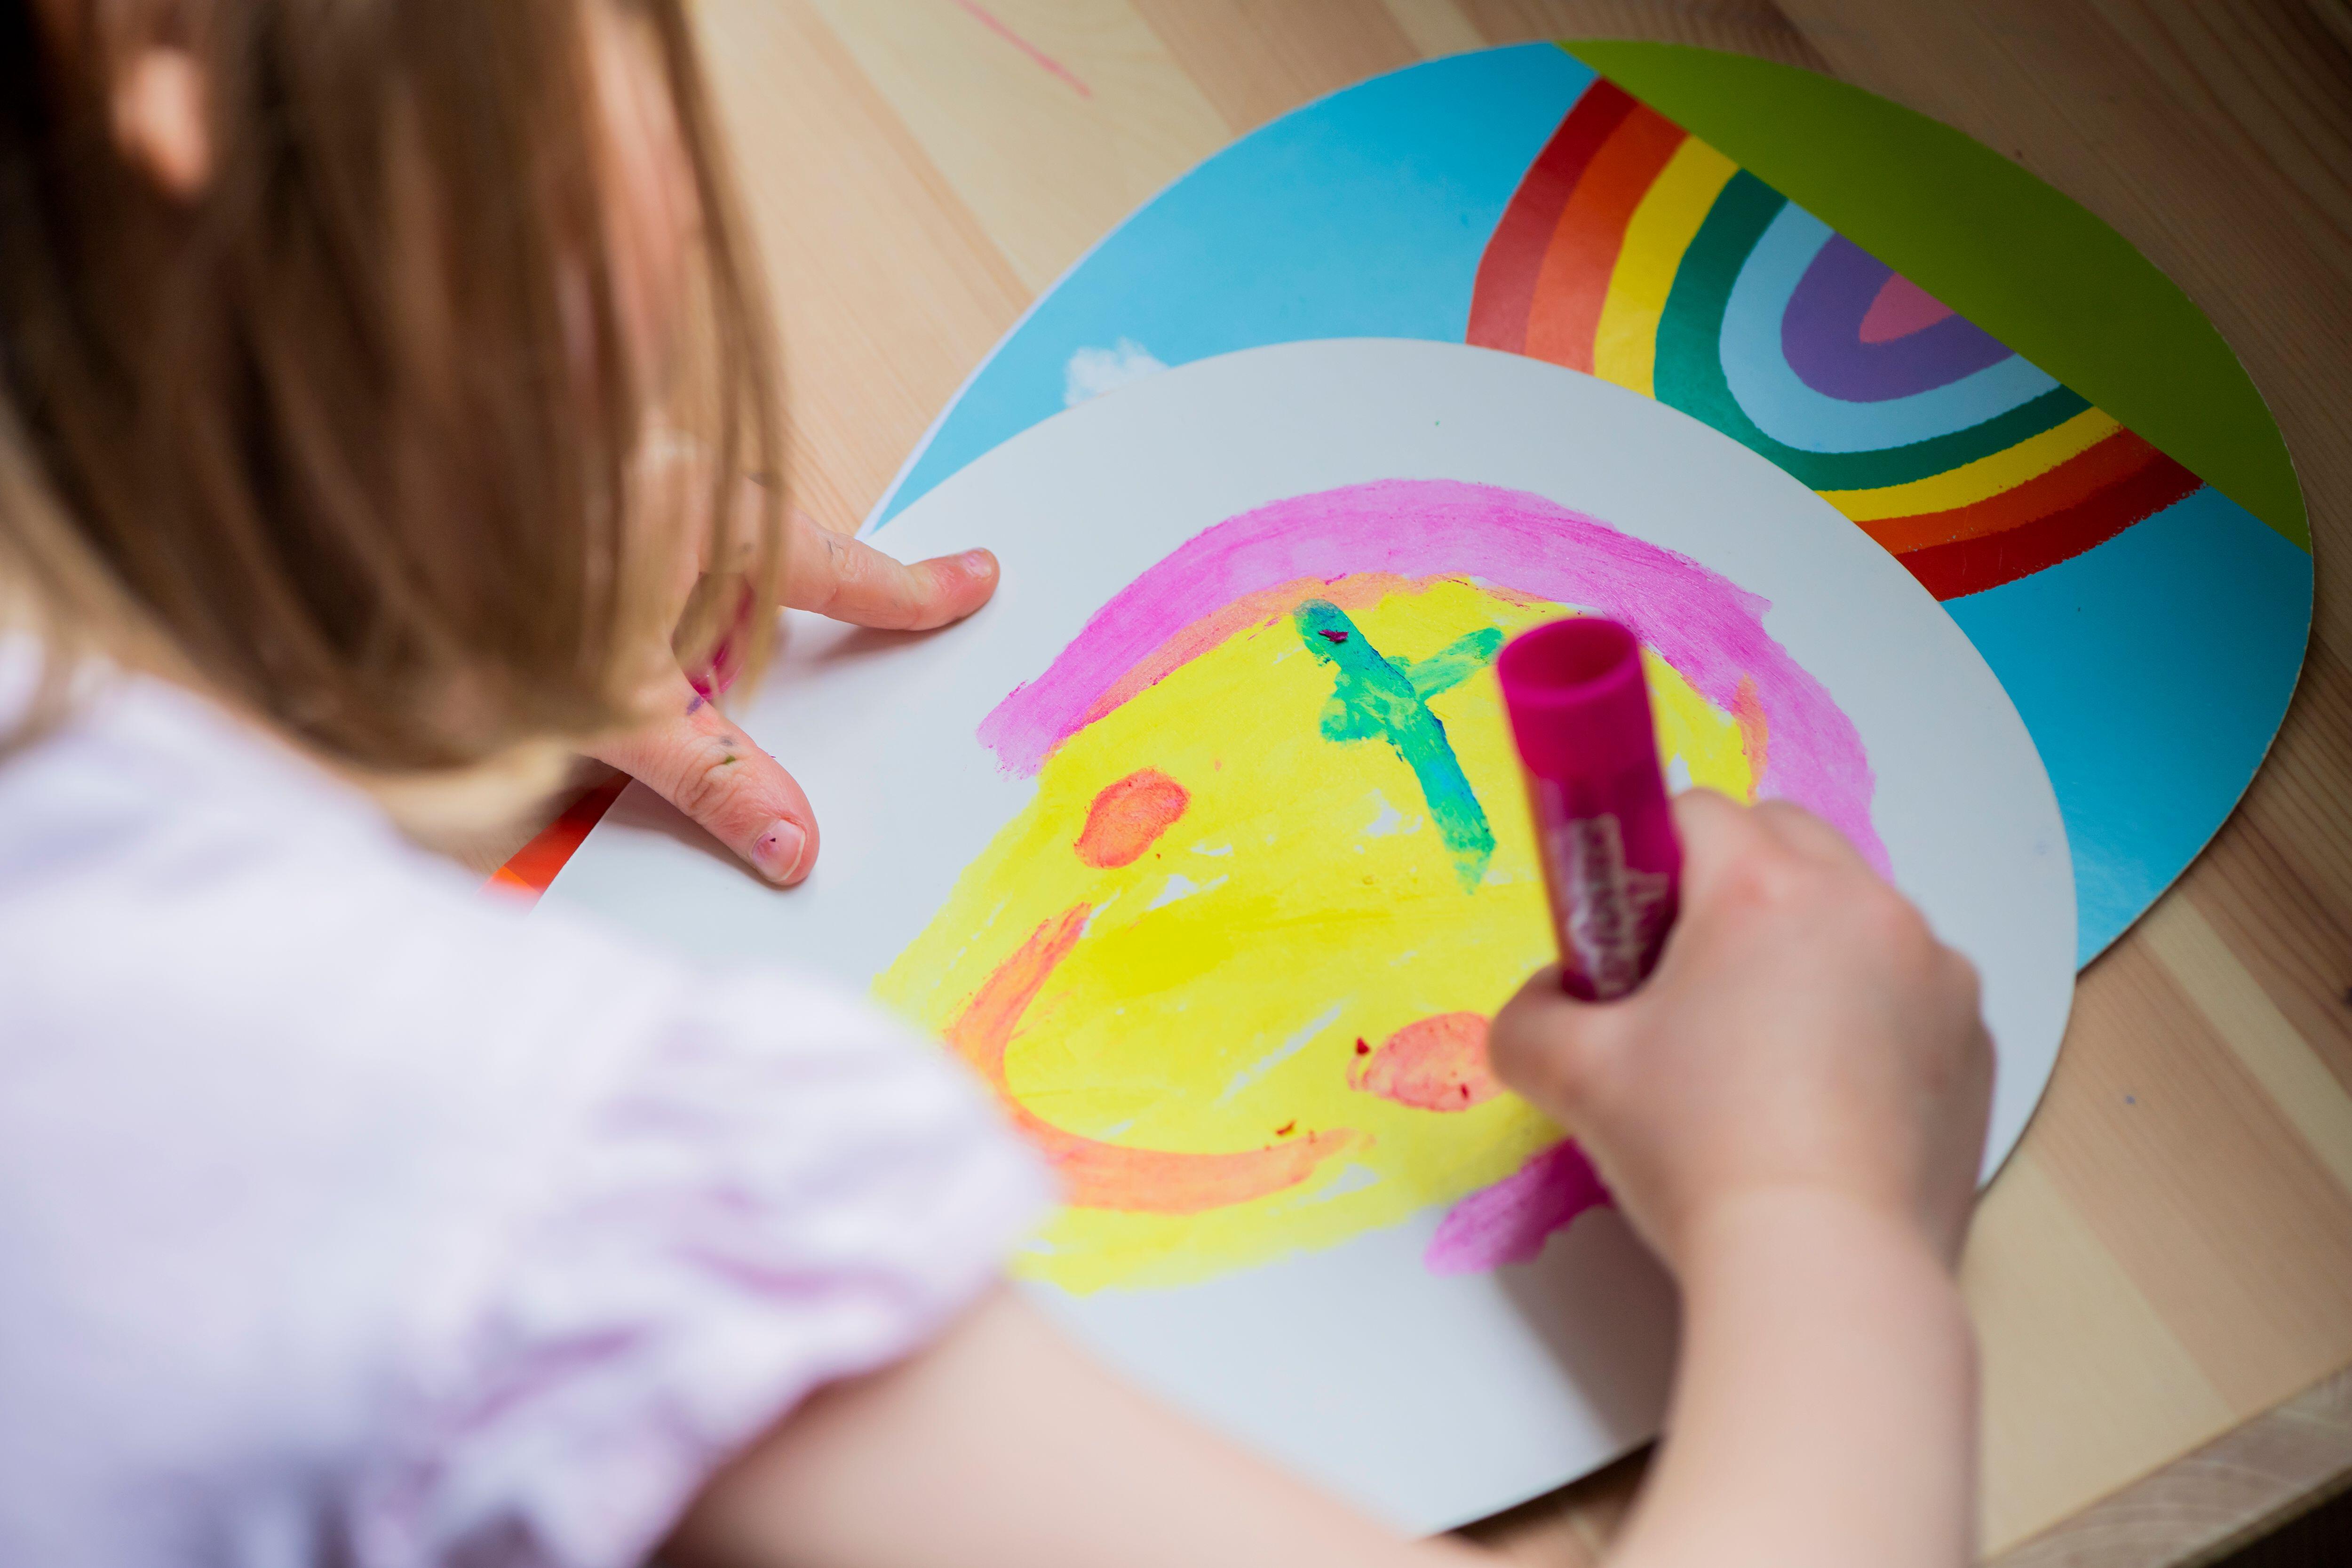 A young girl paints a smiley face